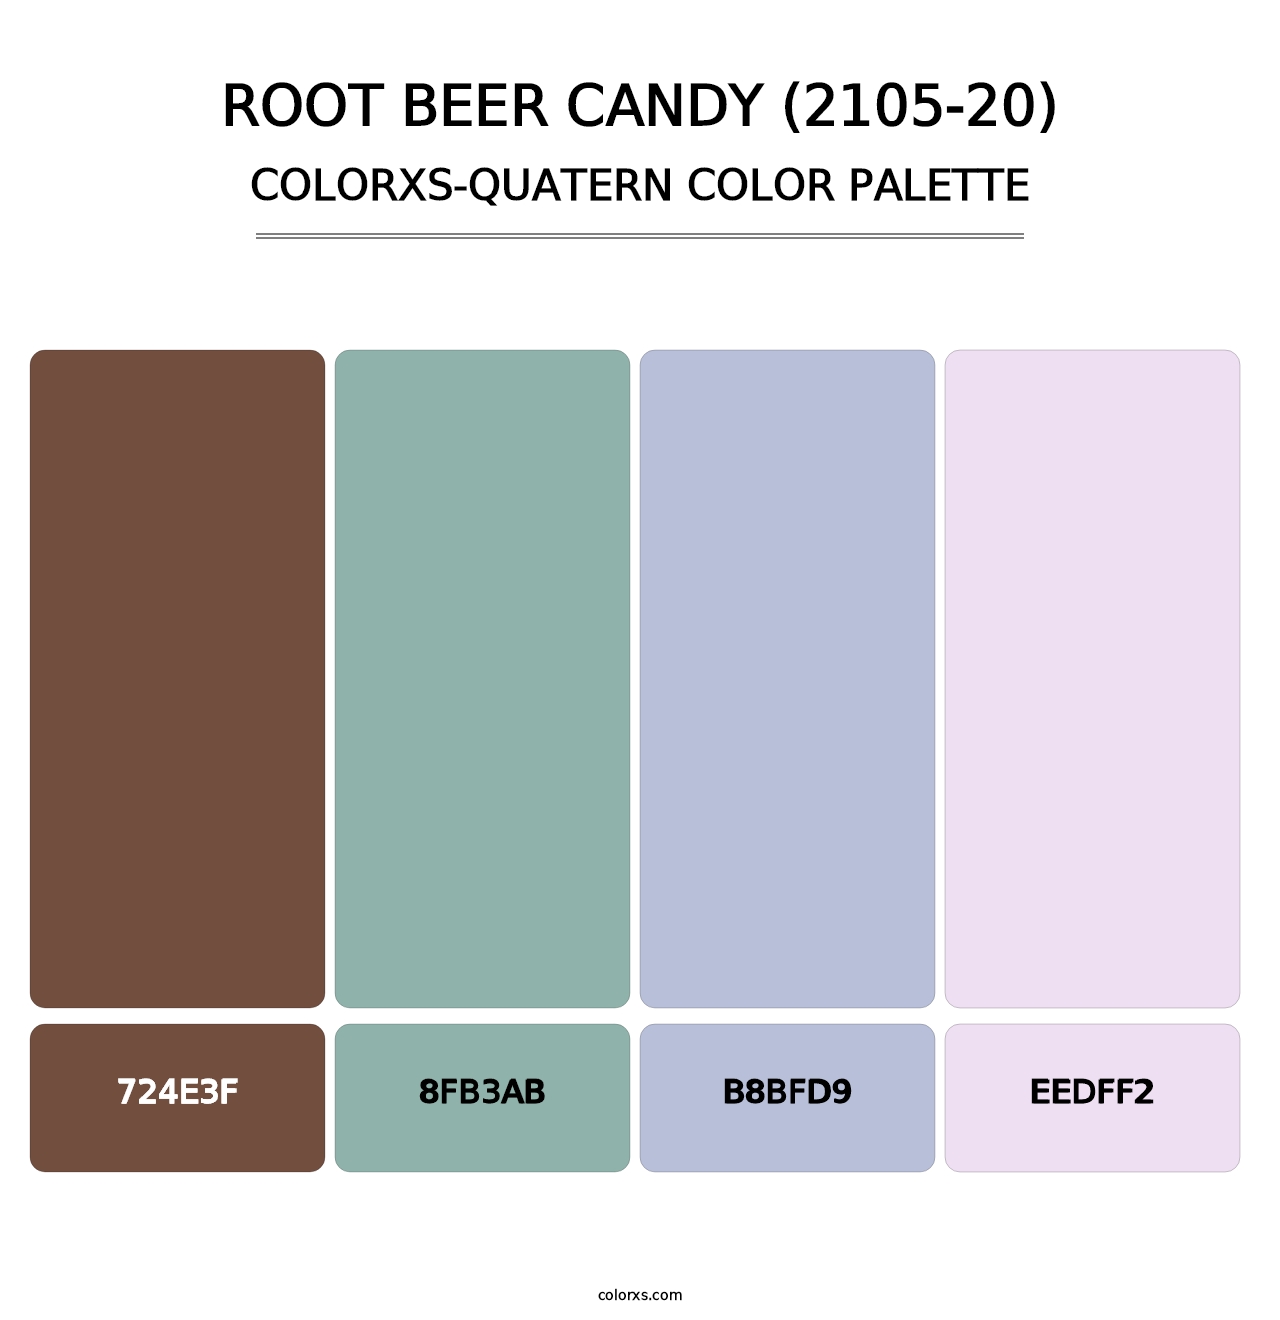 Root Beer Candy (2105-20) - Colorxs Quatern Palette